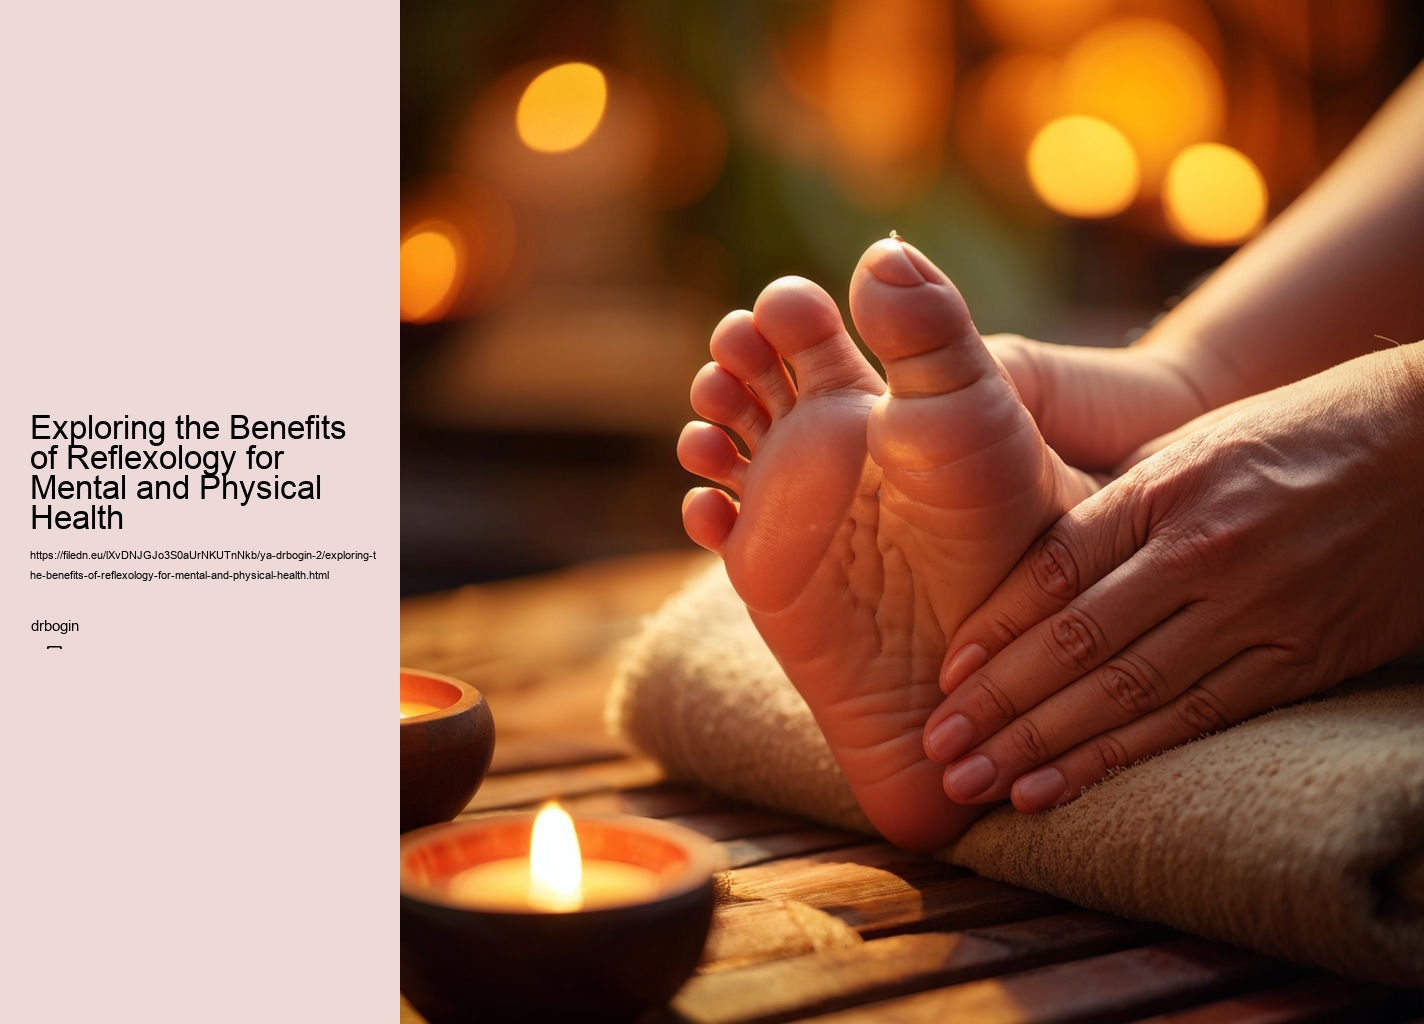 Exploring the Benefits of Reflexology for Mental and Physical Health